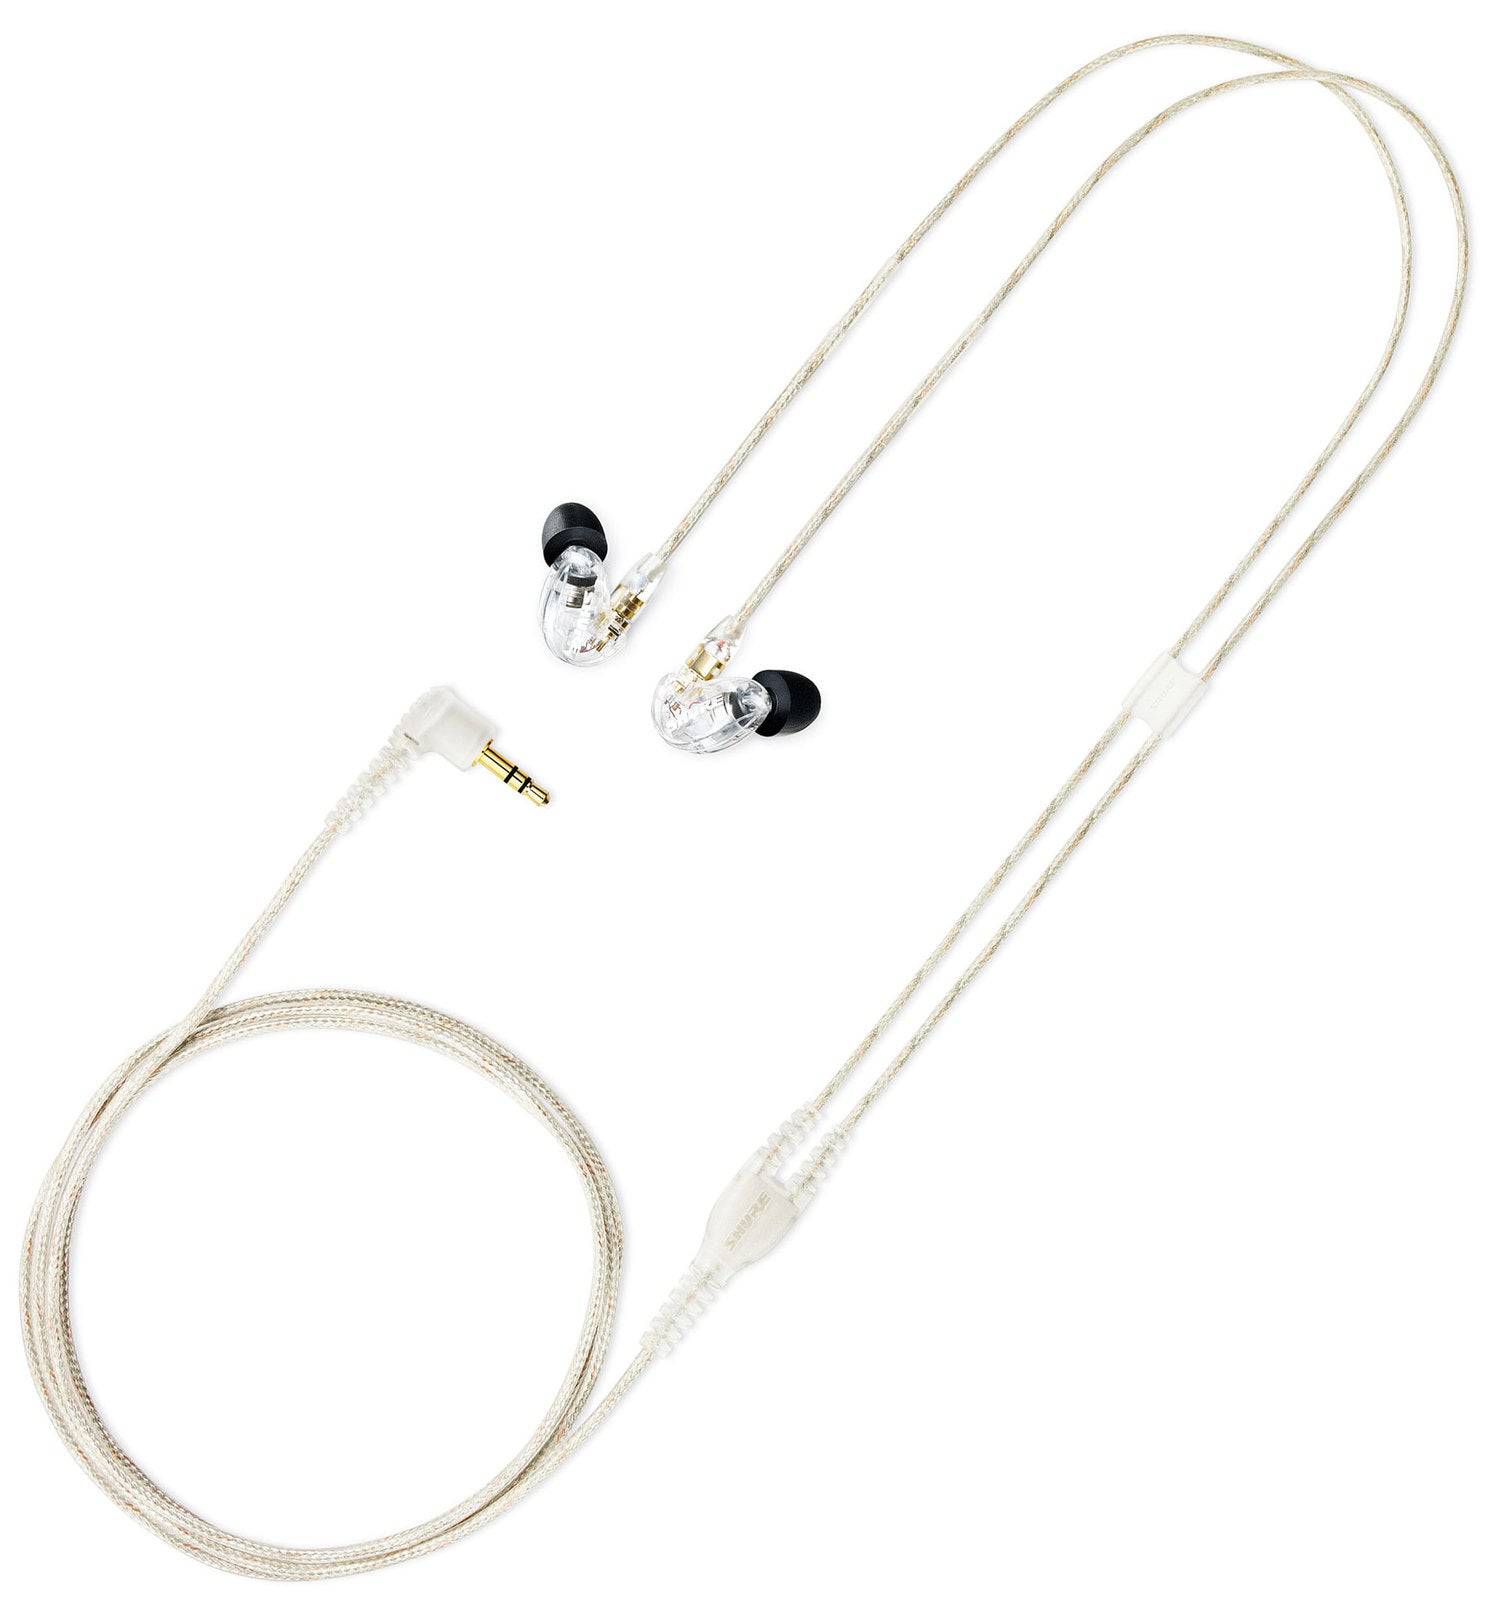 SHURE SE215 SOUND ISOLATING EARPHONES - CLEAR - Joondalup Music Centre